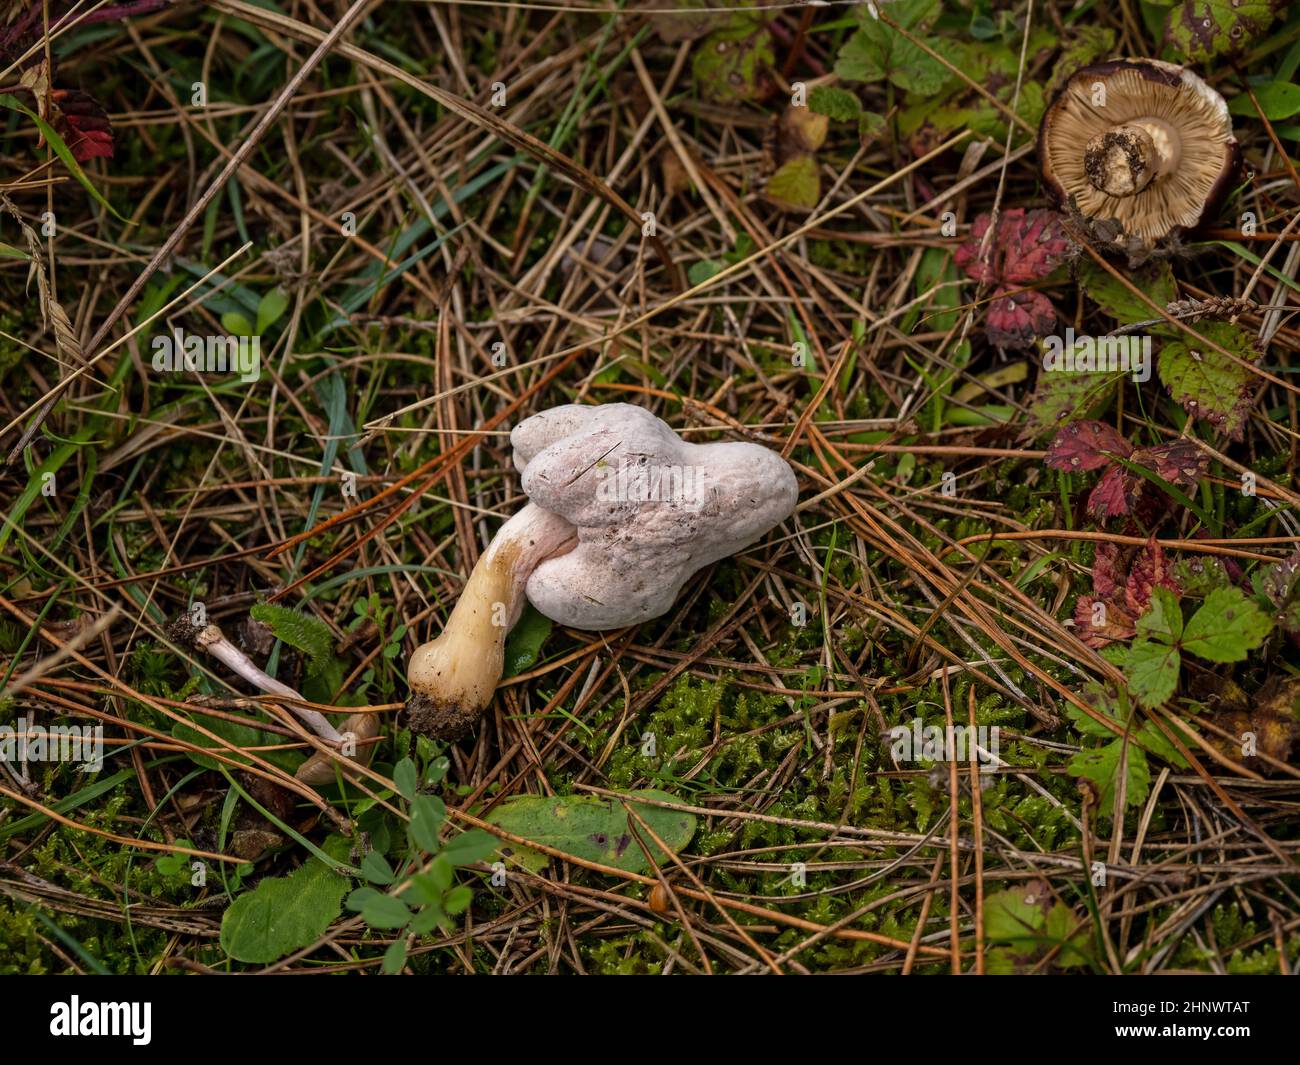 Three fungi knocked over and left lying on the ground. Stock Photo